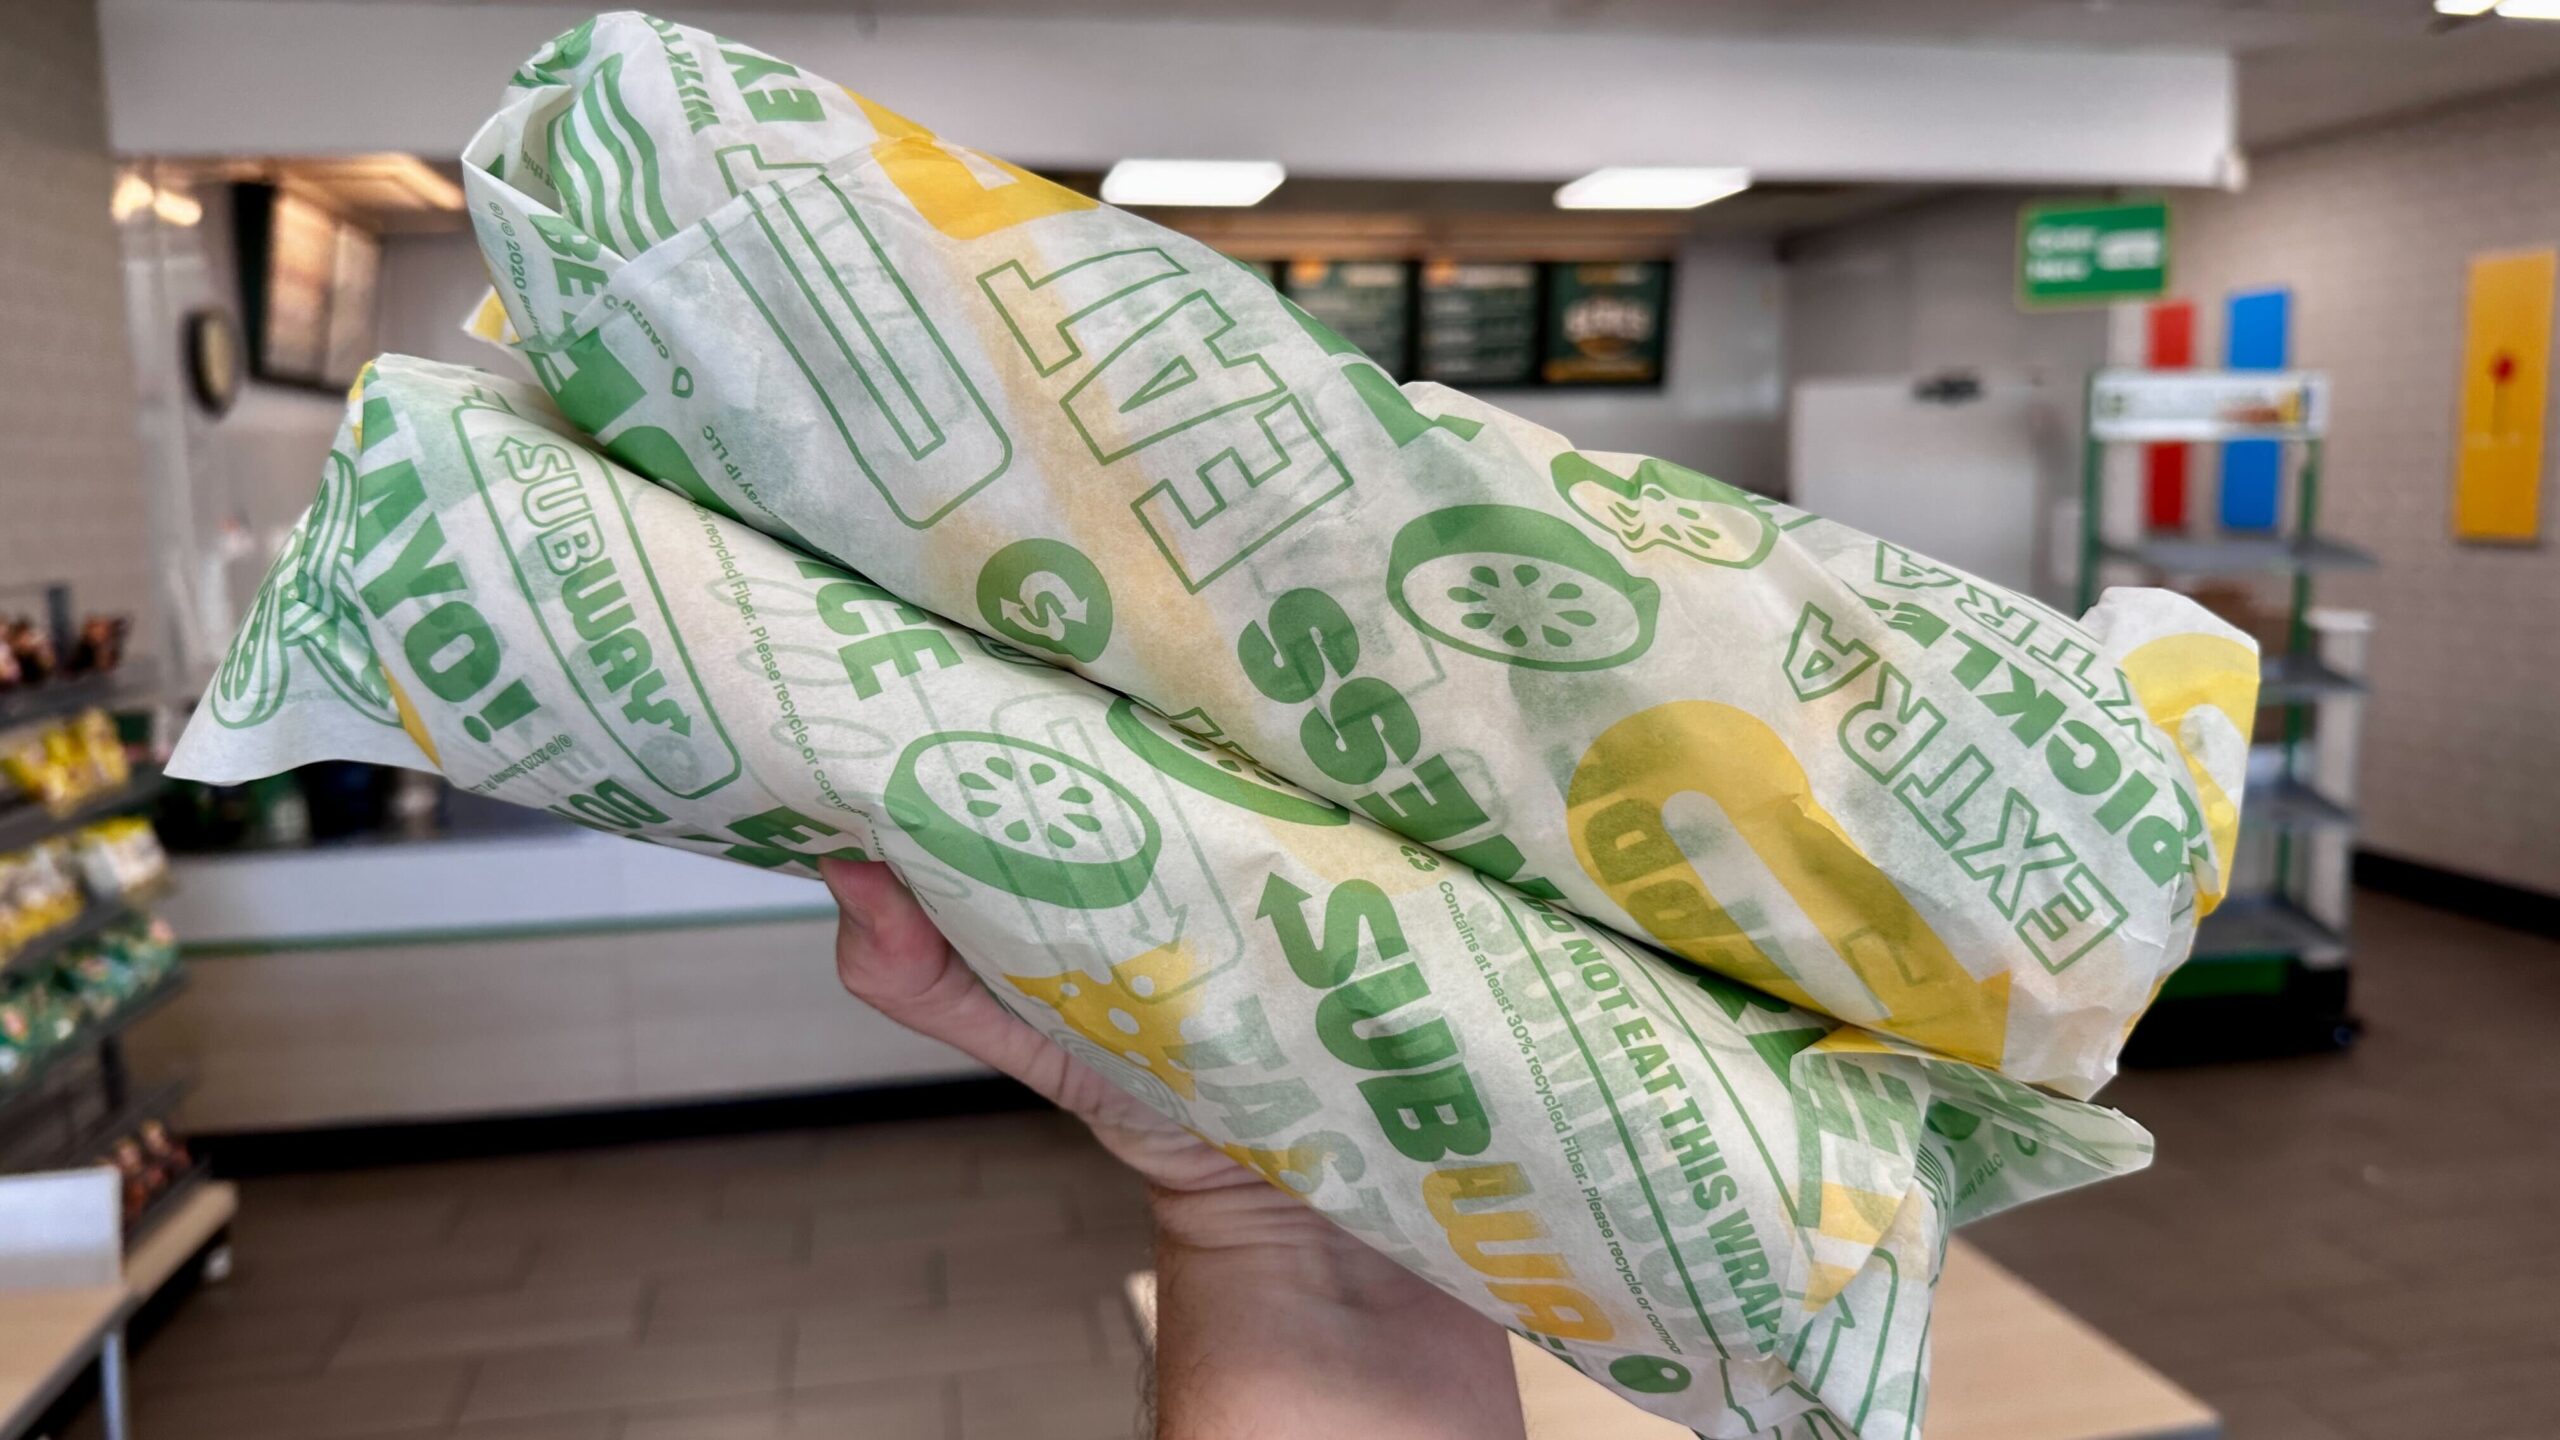 Subway Promo Code and Specials: Buy One, Get One Free Subs!